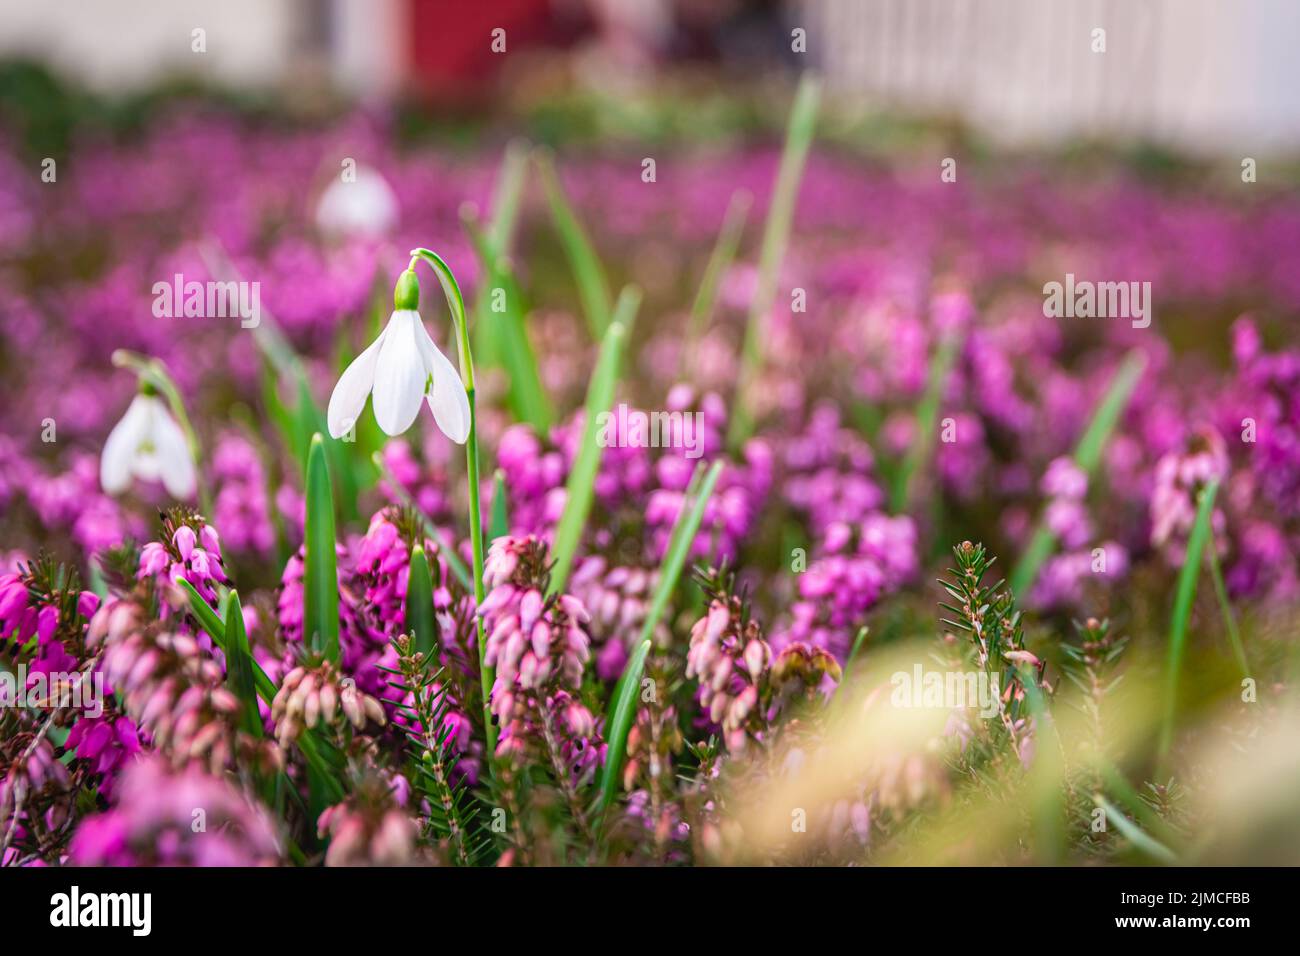 White snowdrops growing in a field of pink Erica Stock Photo